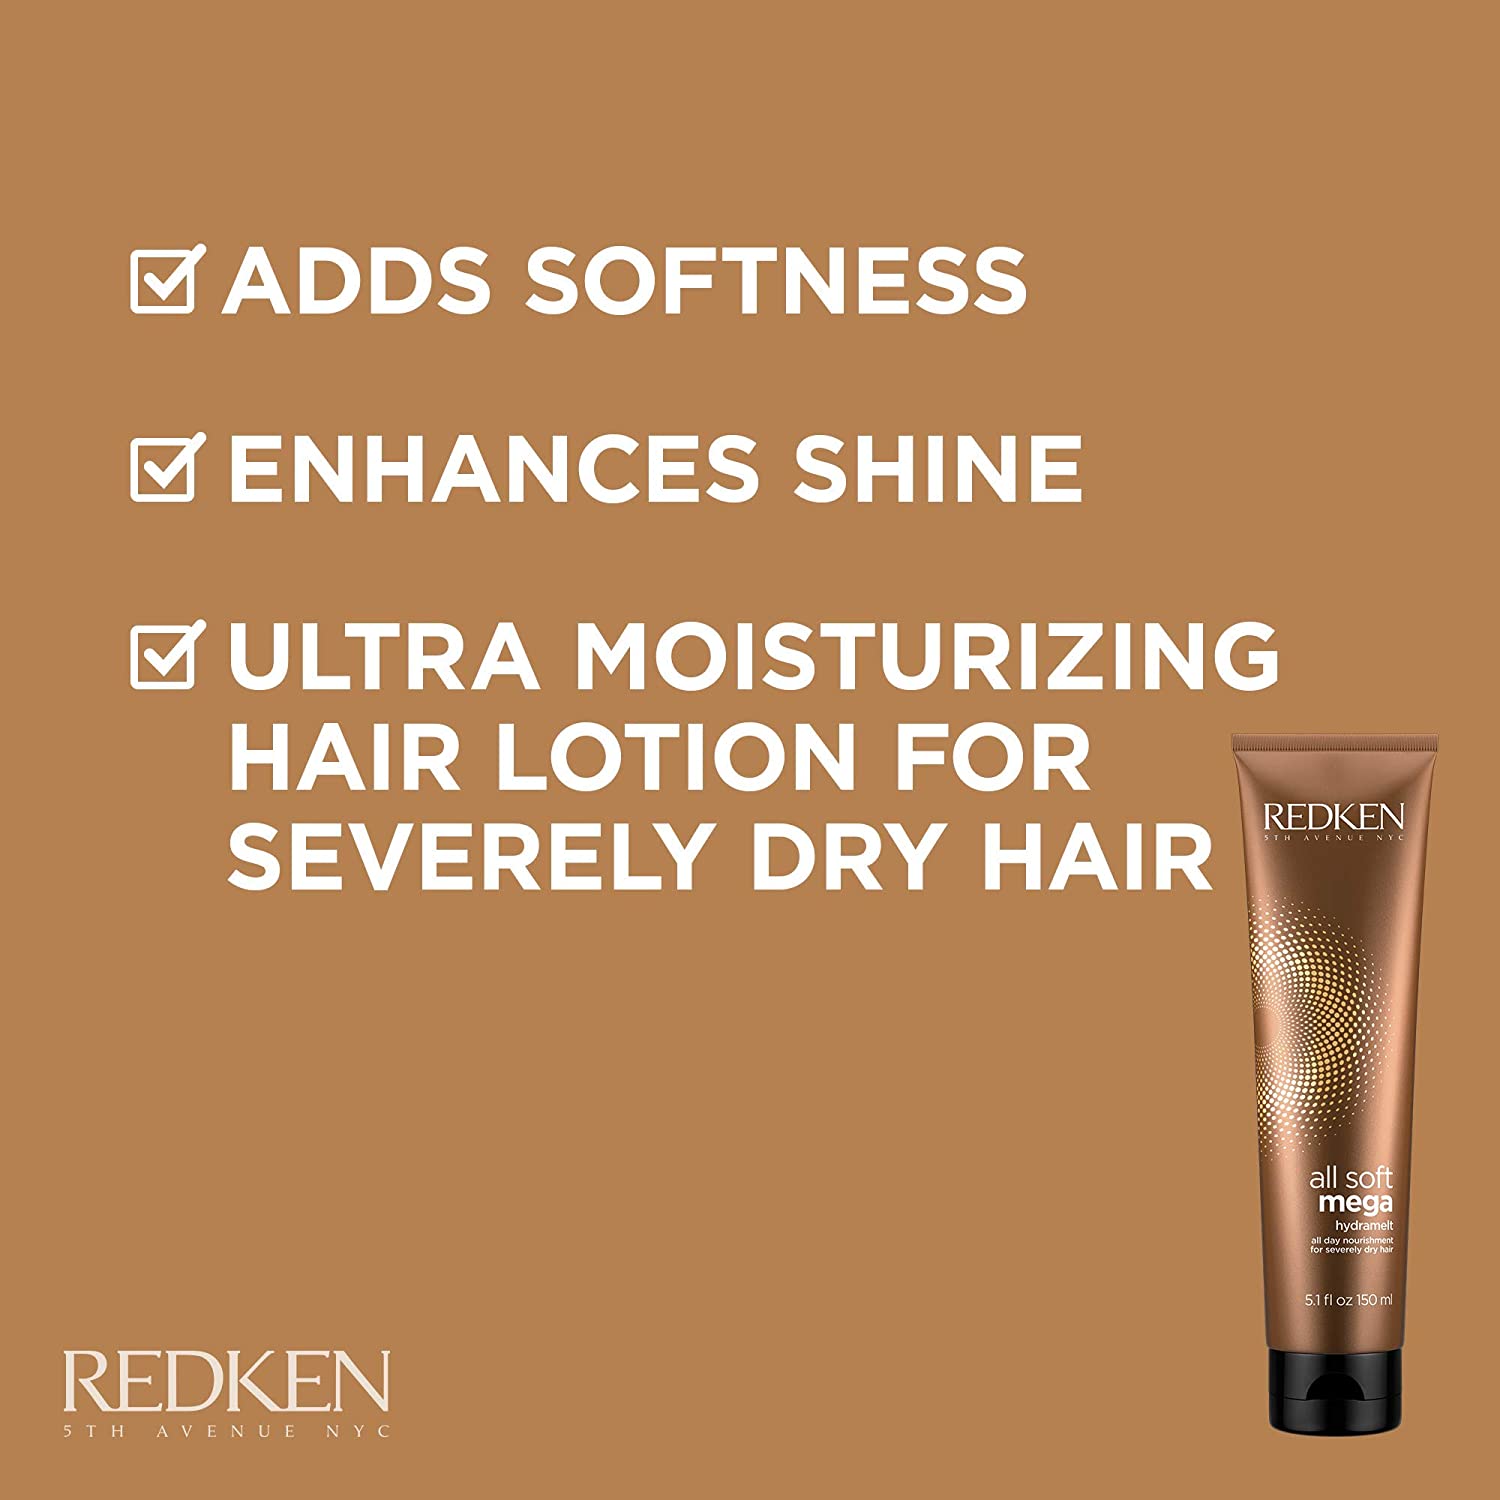 Redken All Soft Mega Hydramelt Leave-In Treatment, Deep Conditioning Hair Treatment for Extremely Dry, Coarse Hair, 5.0999999999999996 fl. oz. - image 3 of 4